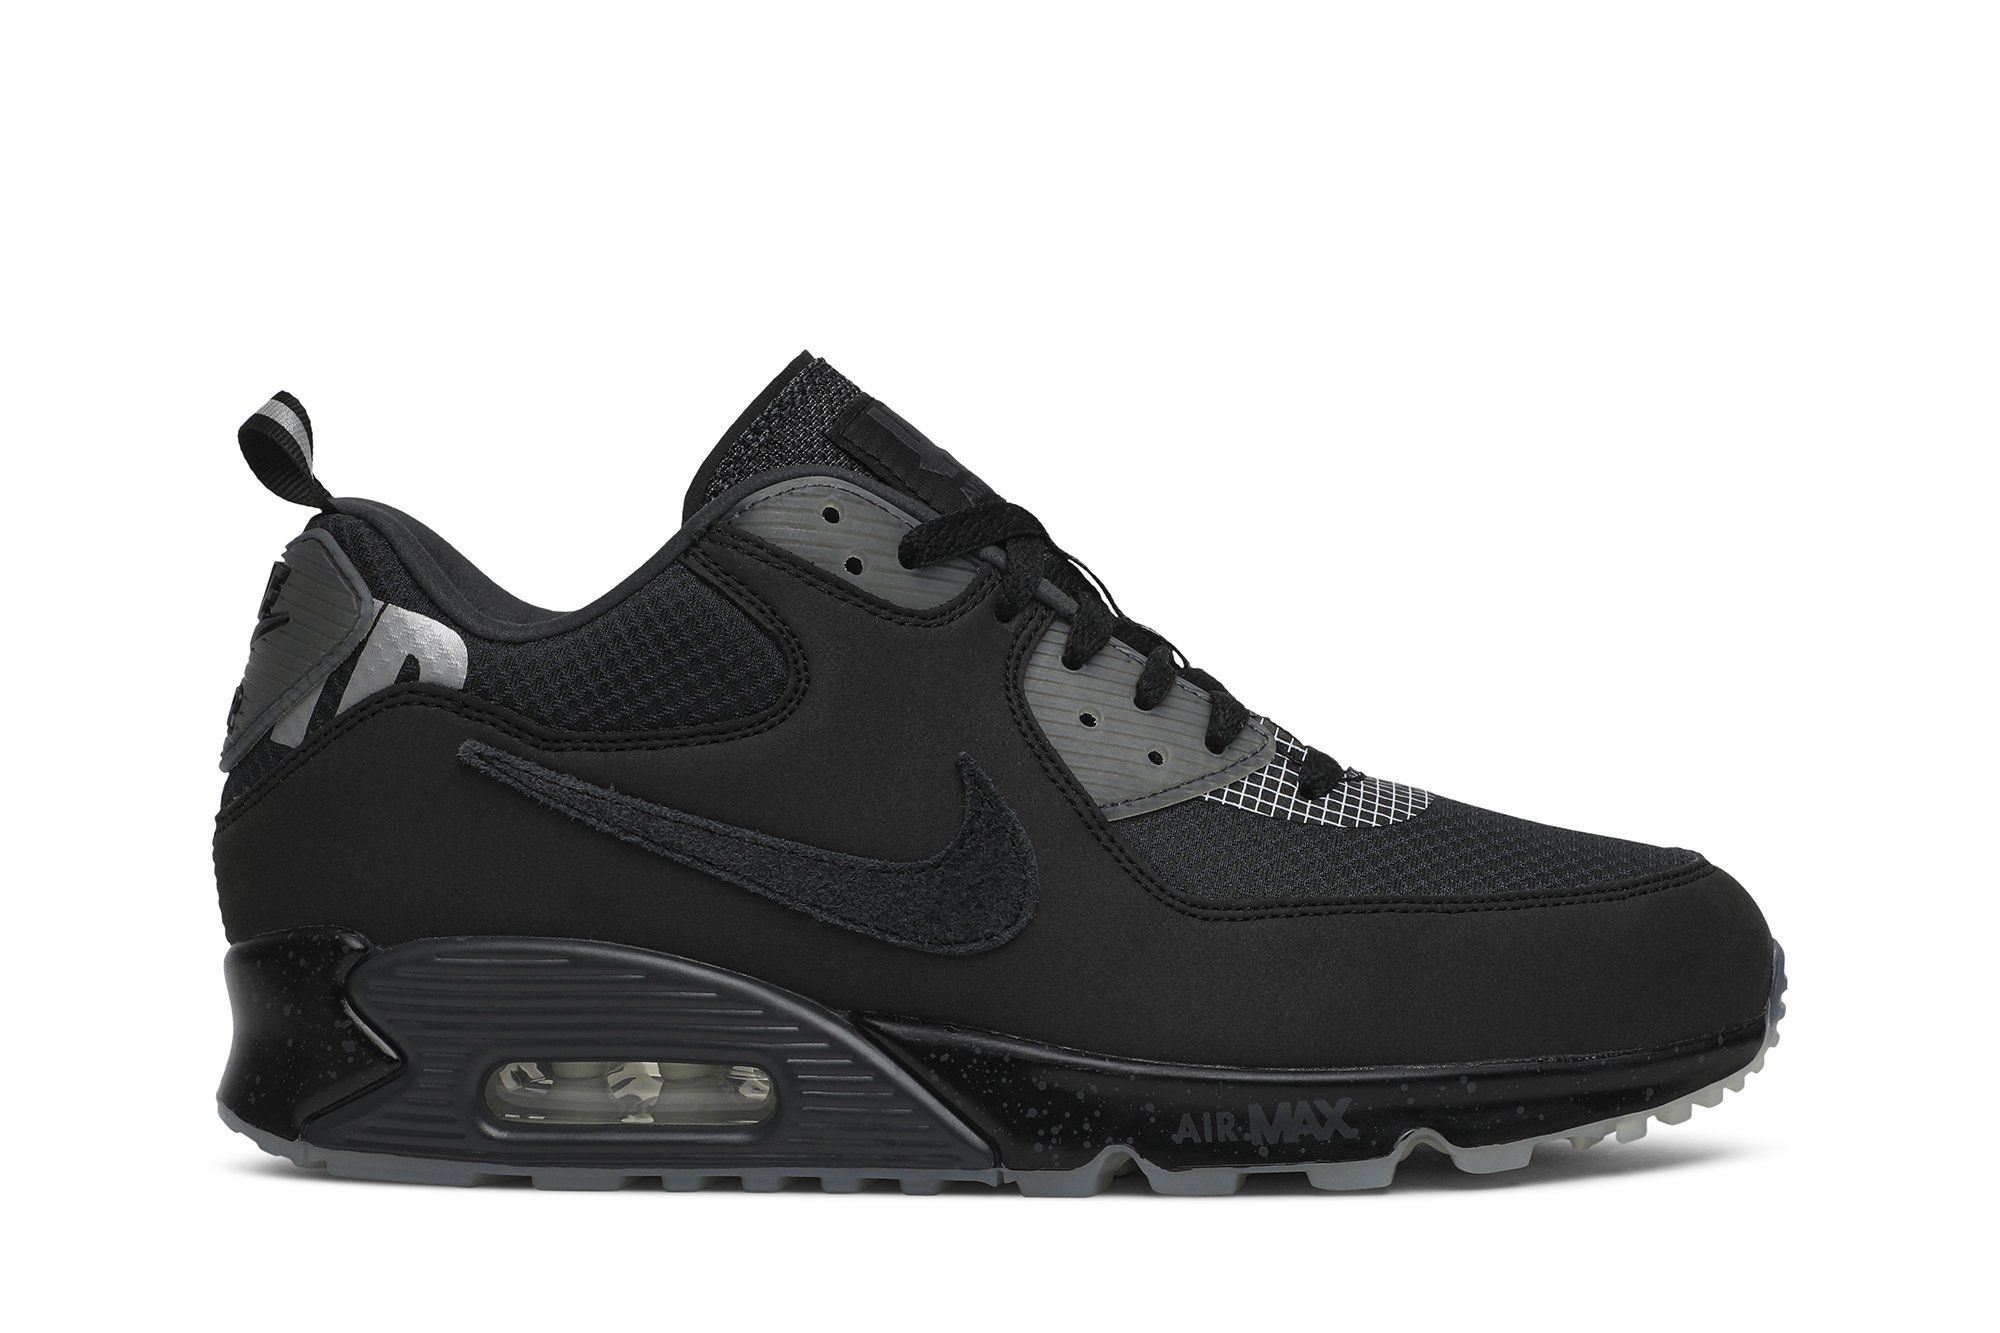 Undefeated x Air Max 90 'Anthracite'